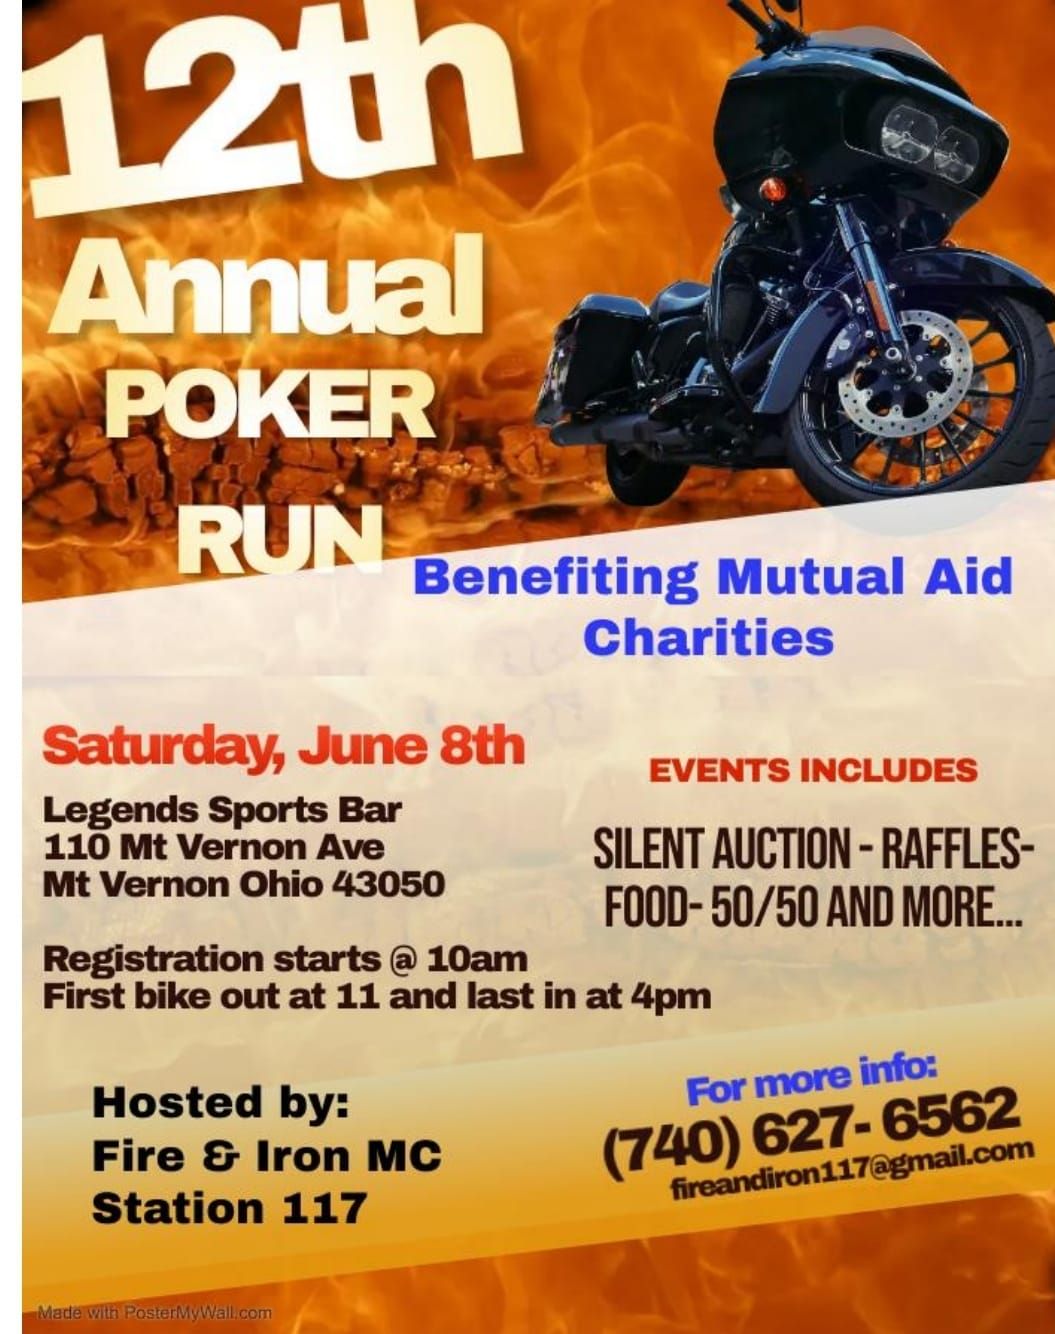 Fire and Iron Charity Poker Run to benefit Mutual Aid Charities 